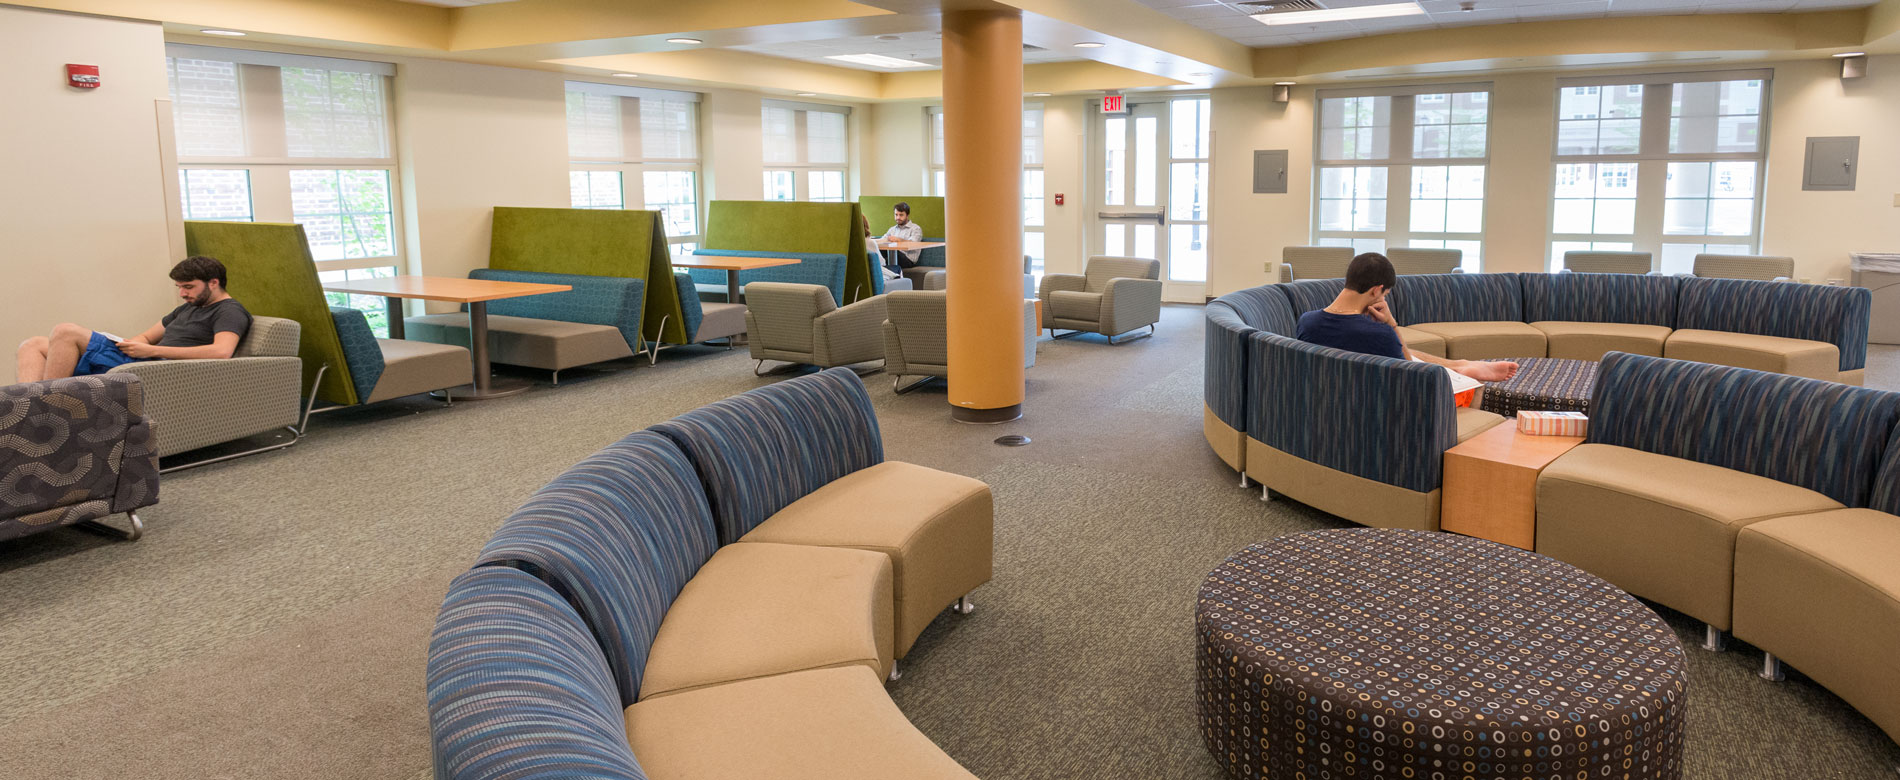 Students relaxing and studying in lounge with comfortable chairs and a curved, modular sofa